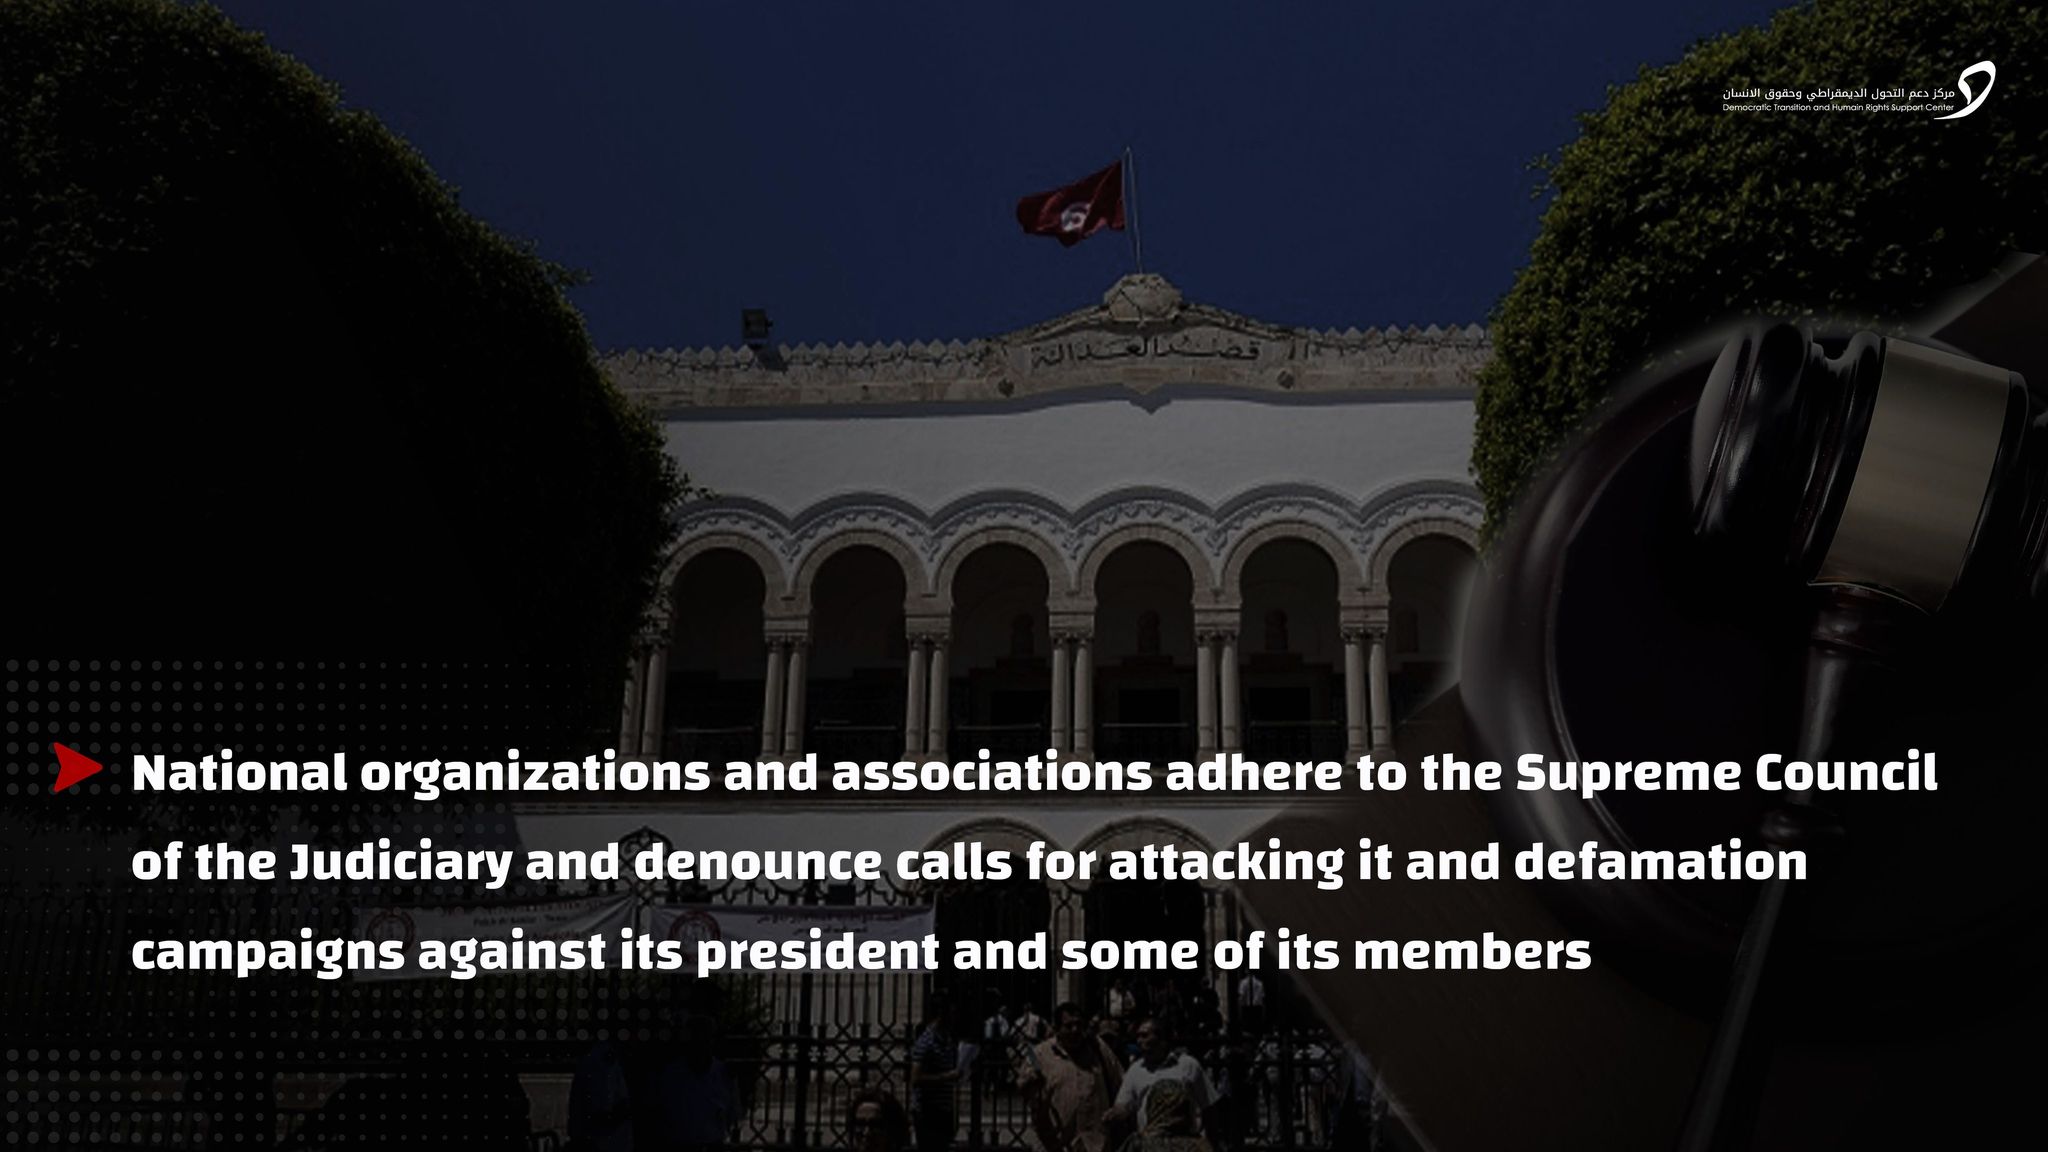 Joint statement:National organizations and associations adhere to the Supreme Council of the Judiciary and denounce calls for attacking it and defamation campaigns against its president and some of its members